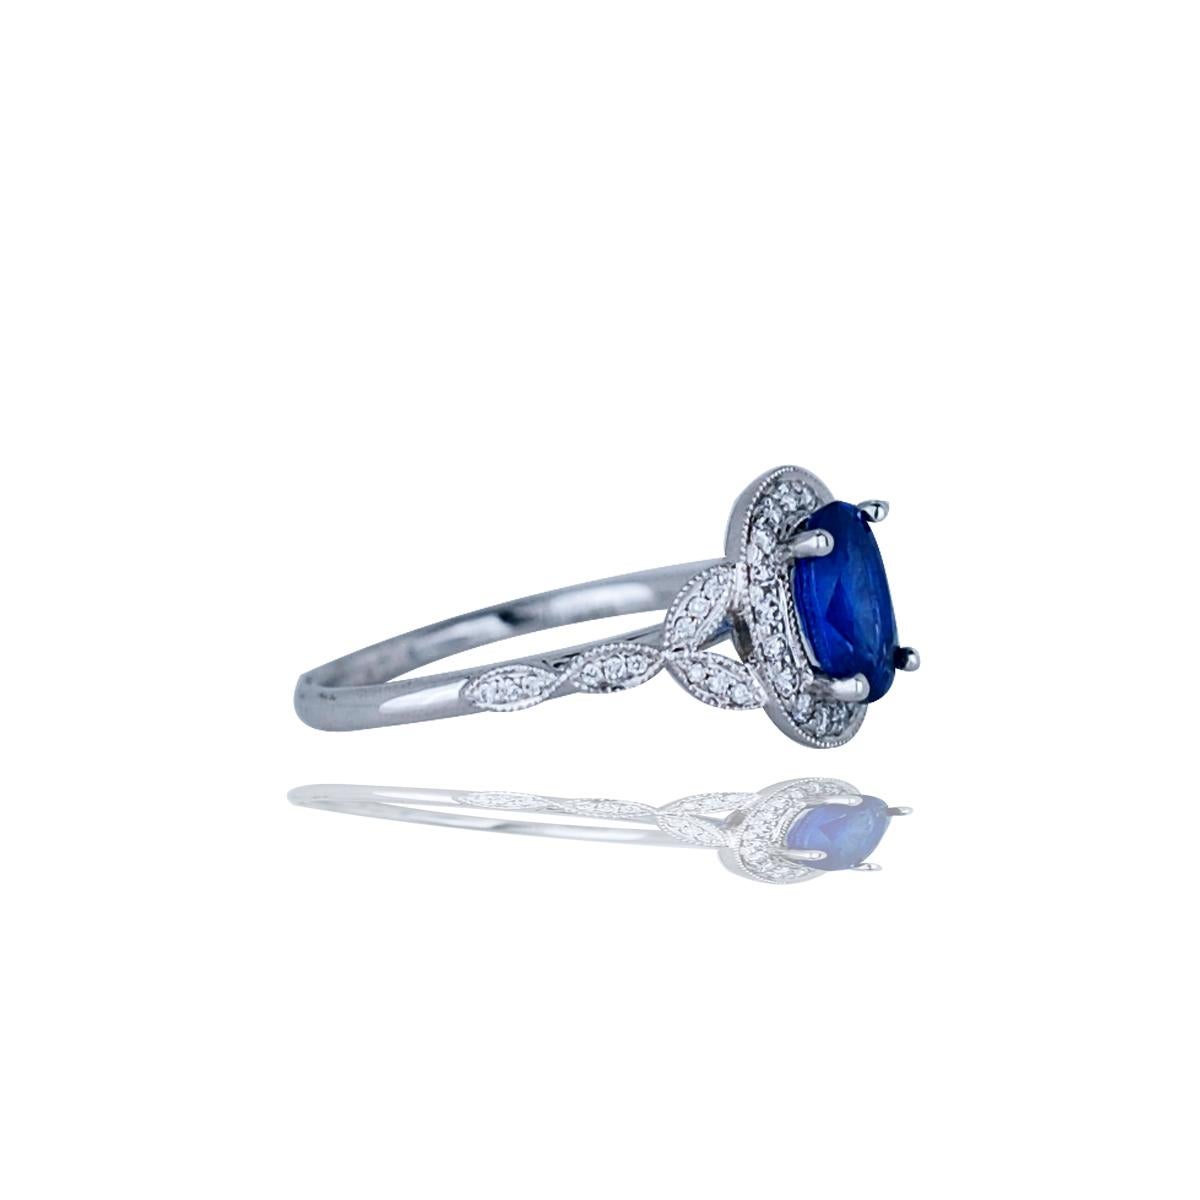 This sapphire has a gorgeous blue sapphire with an even blue color tone.  The center stone has a rich cobalt blue color and SI clarity.  The center stone is complimented by over .30 carats of white G-H SI.  The ring is crafted from 14k and has